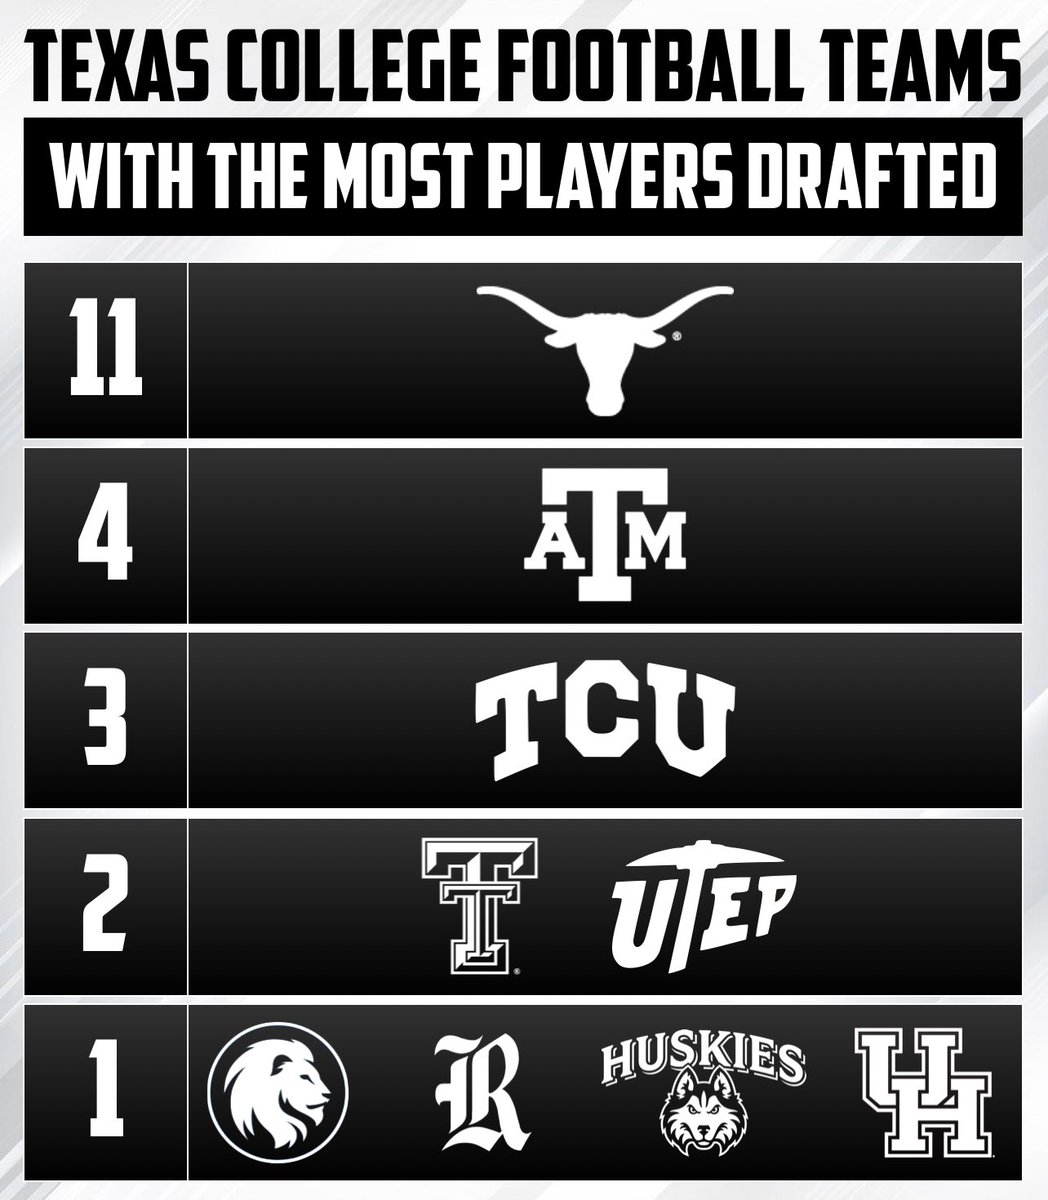 The Longhorns had the most players drafted in Texas this year with an astounding ELEVEN players selected! #nfldraft